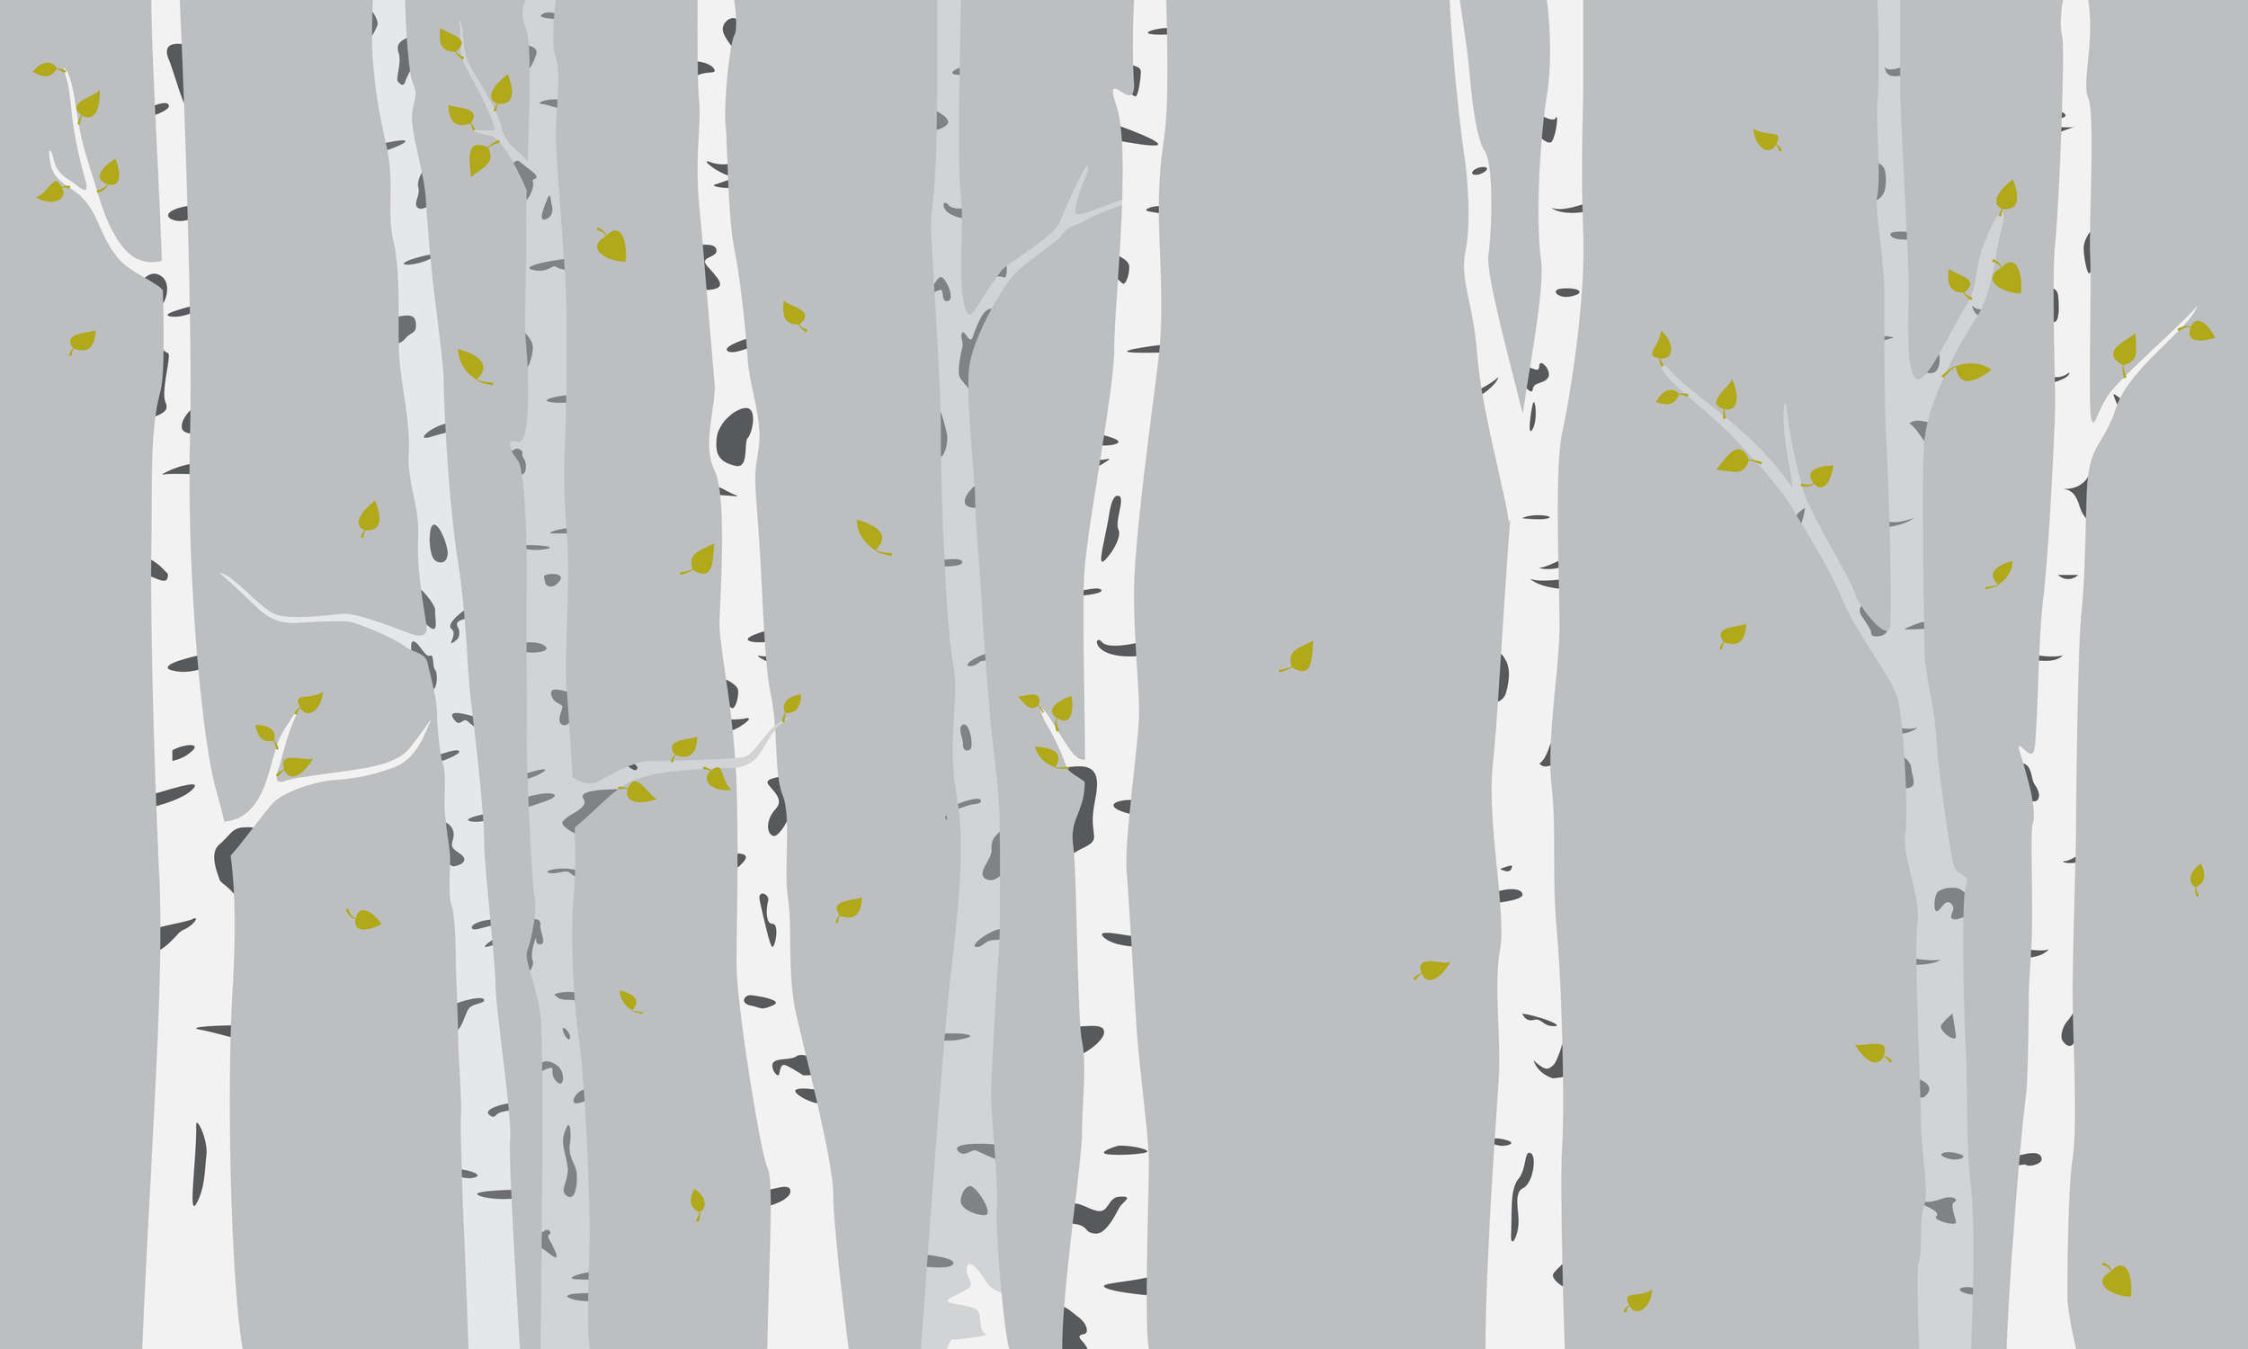             Photo wallpaper with painted birch forest for children's room - Smooth & pearlescent fleece
        